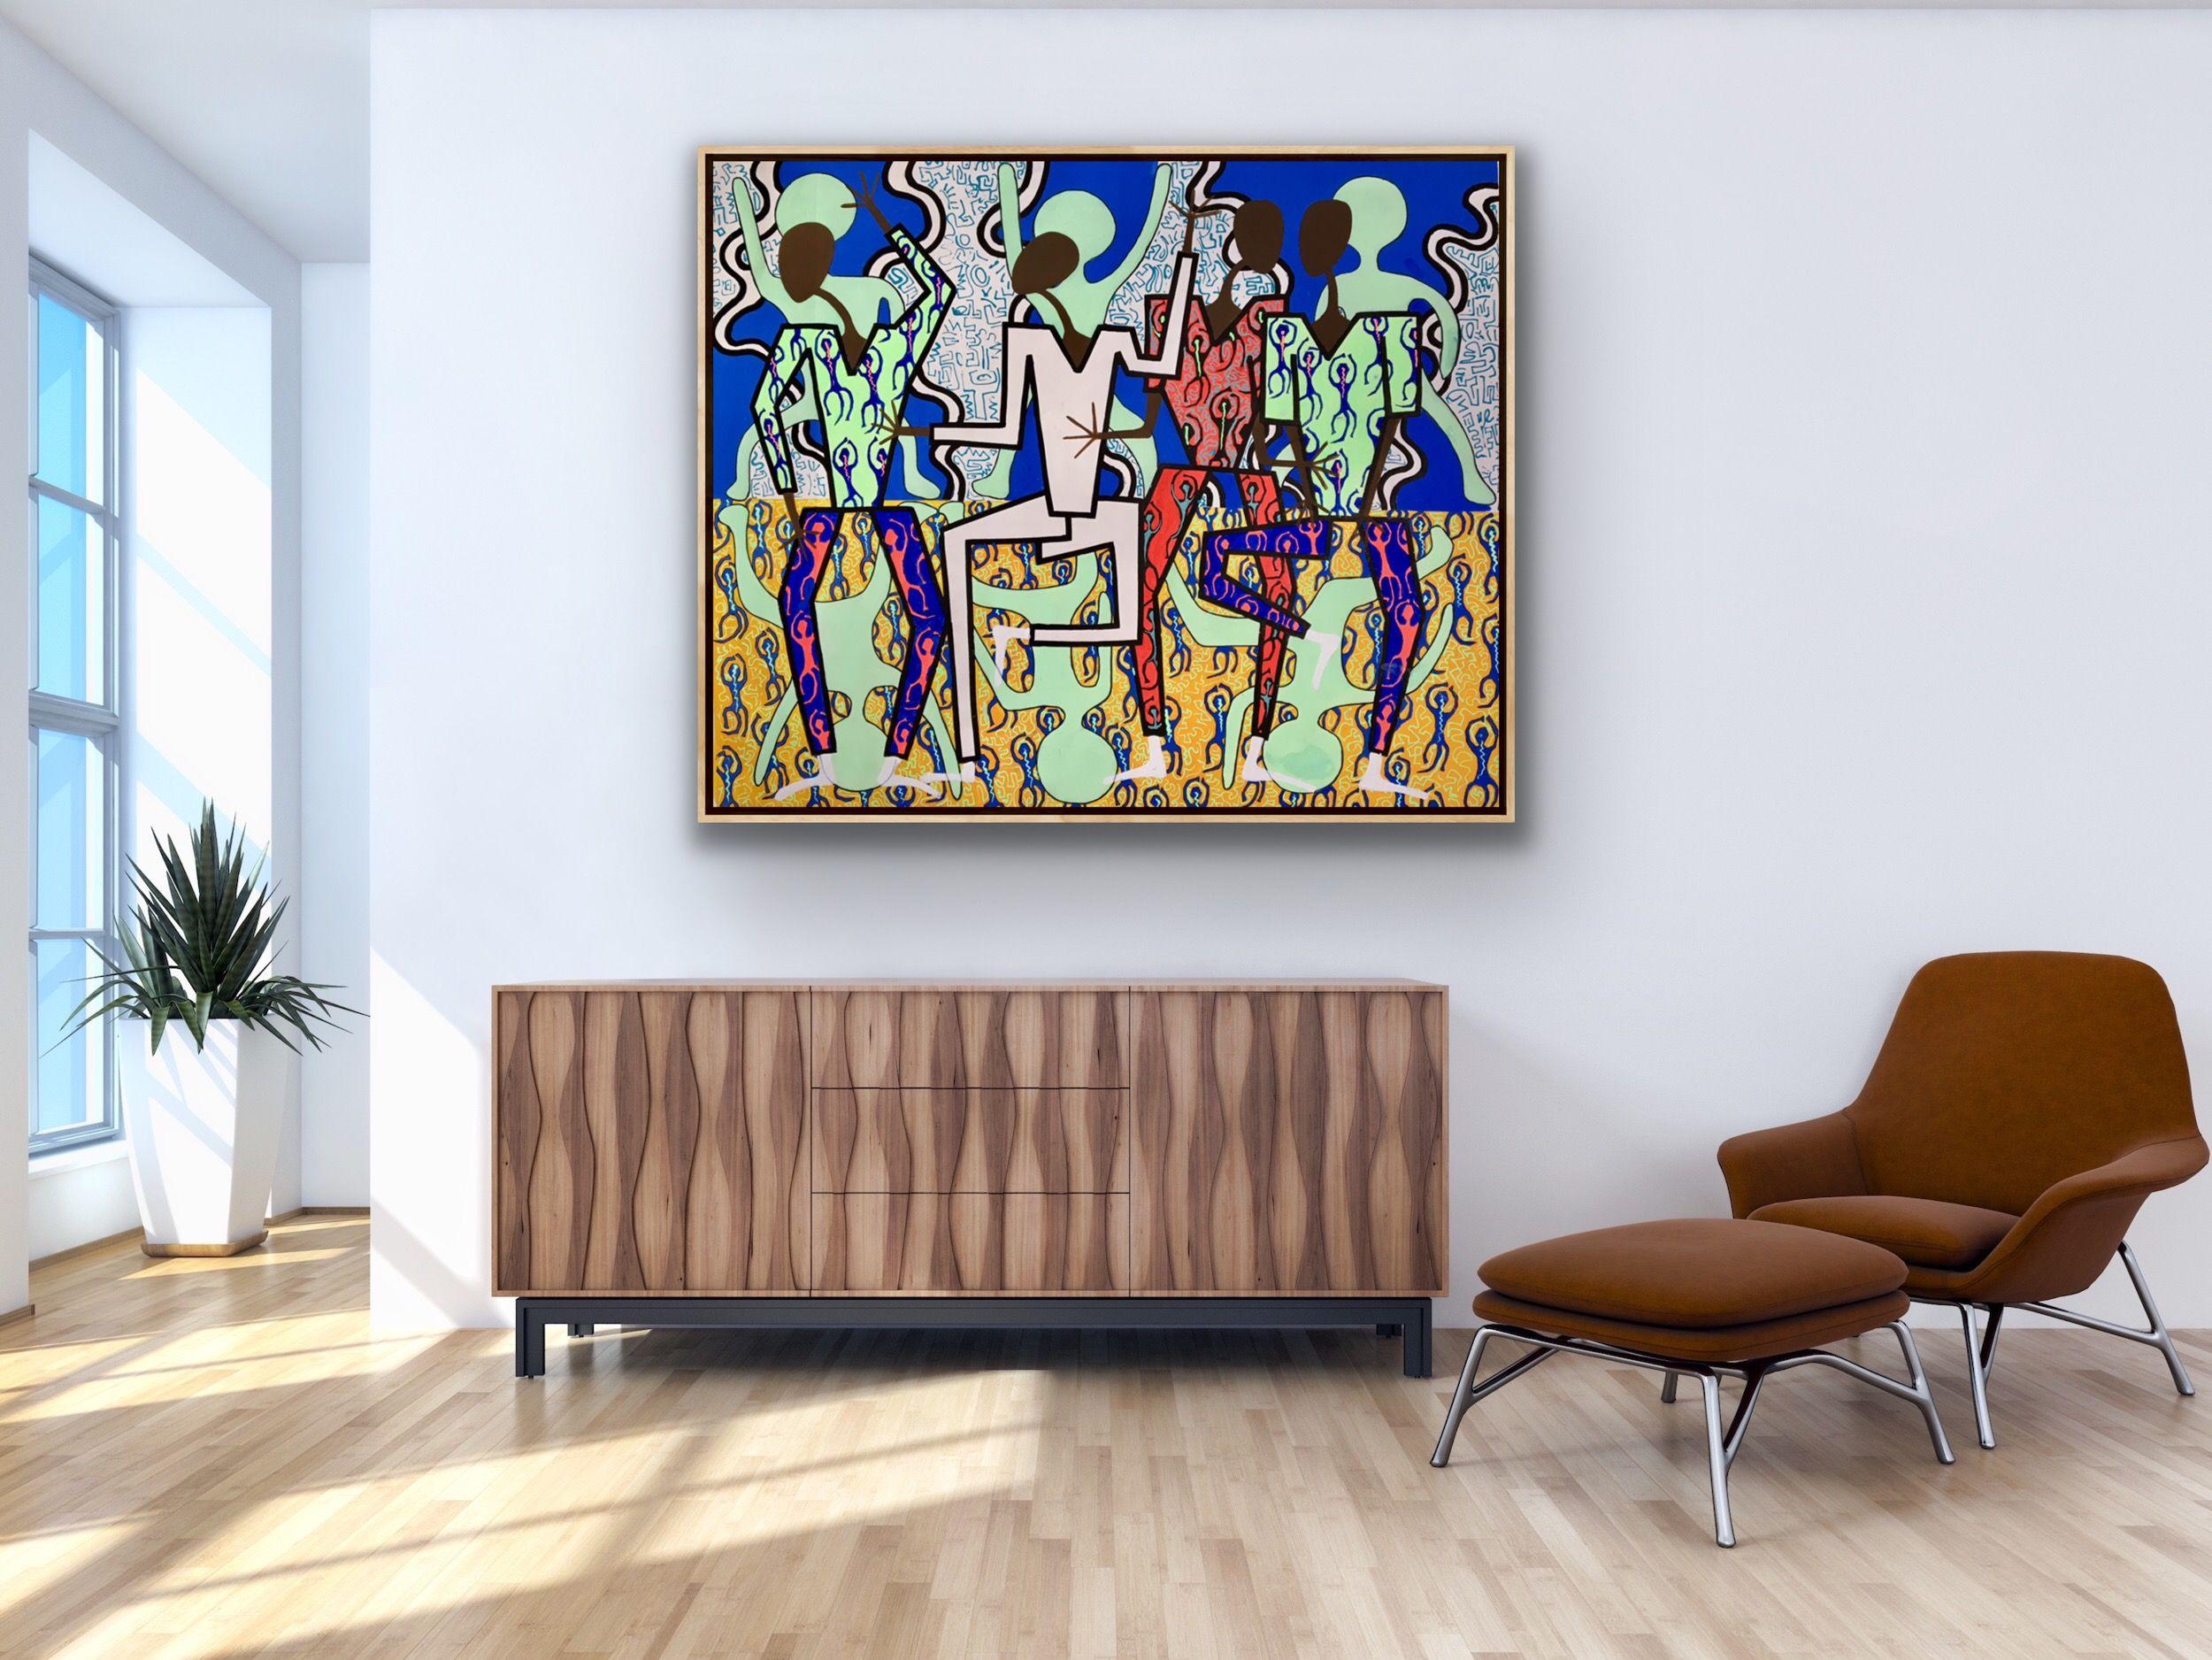 original acrylic painting on the canvas. Highly inspired by my previous african inspired canvases. Inspired by african culture, Haring, Picasso, Matisse. Expressing some african-like figures on the background inspired by Haring's artworks ::